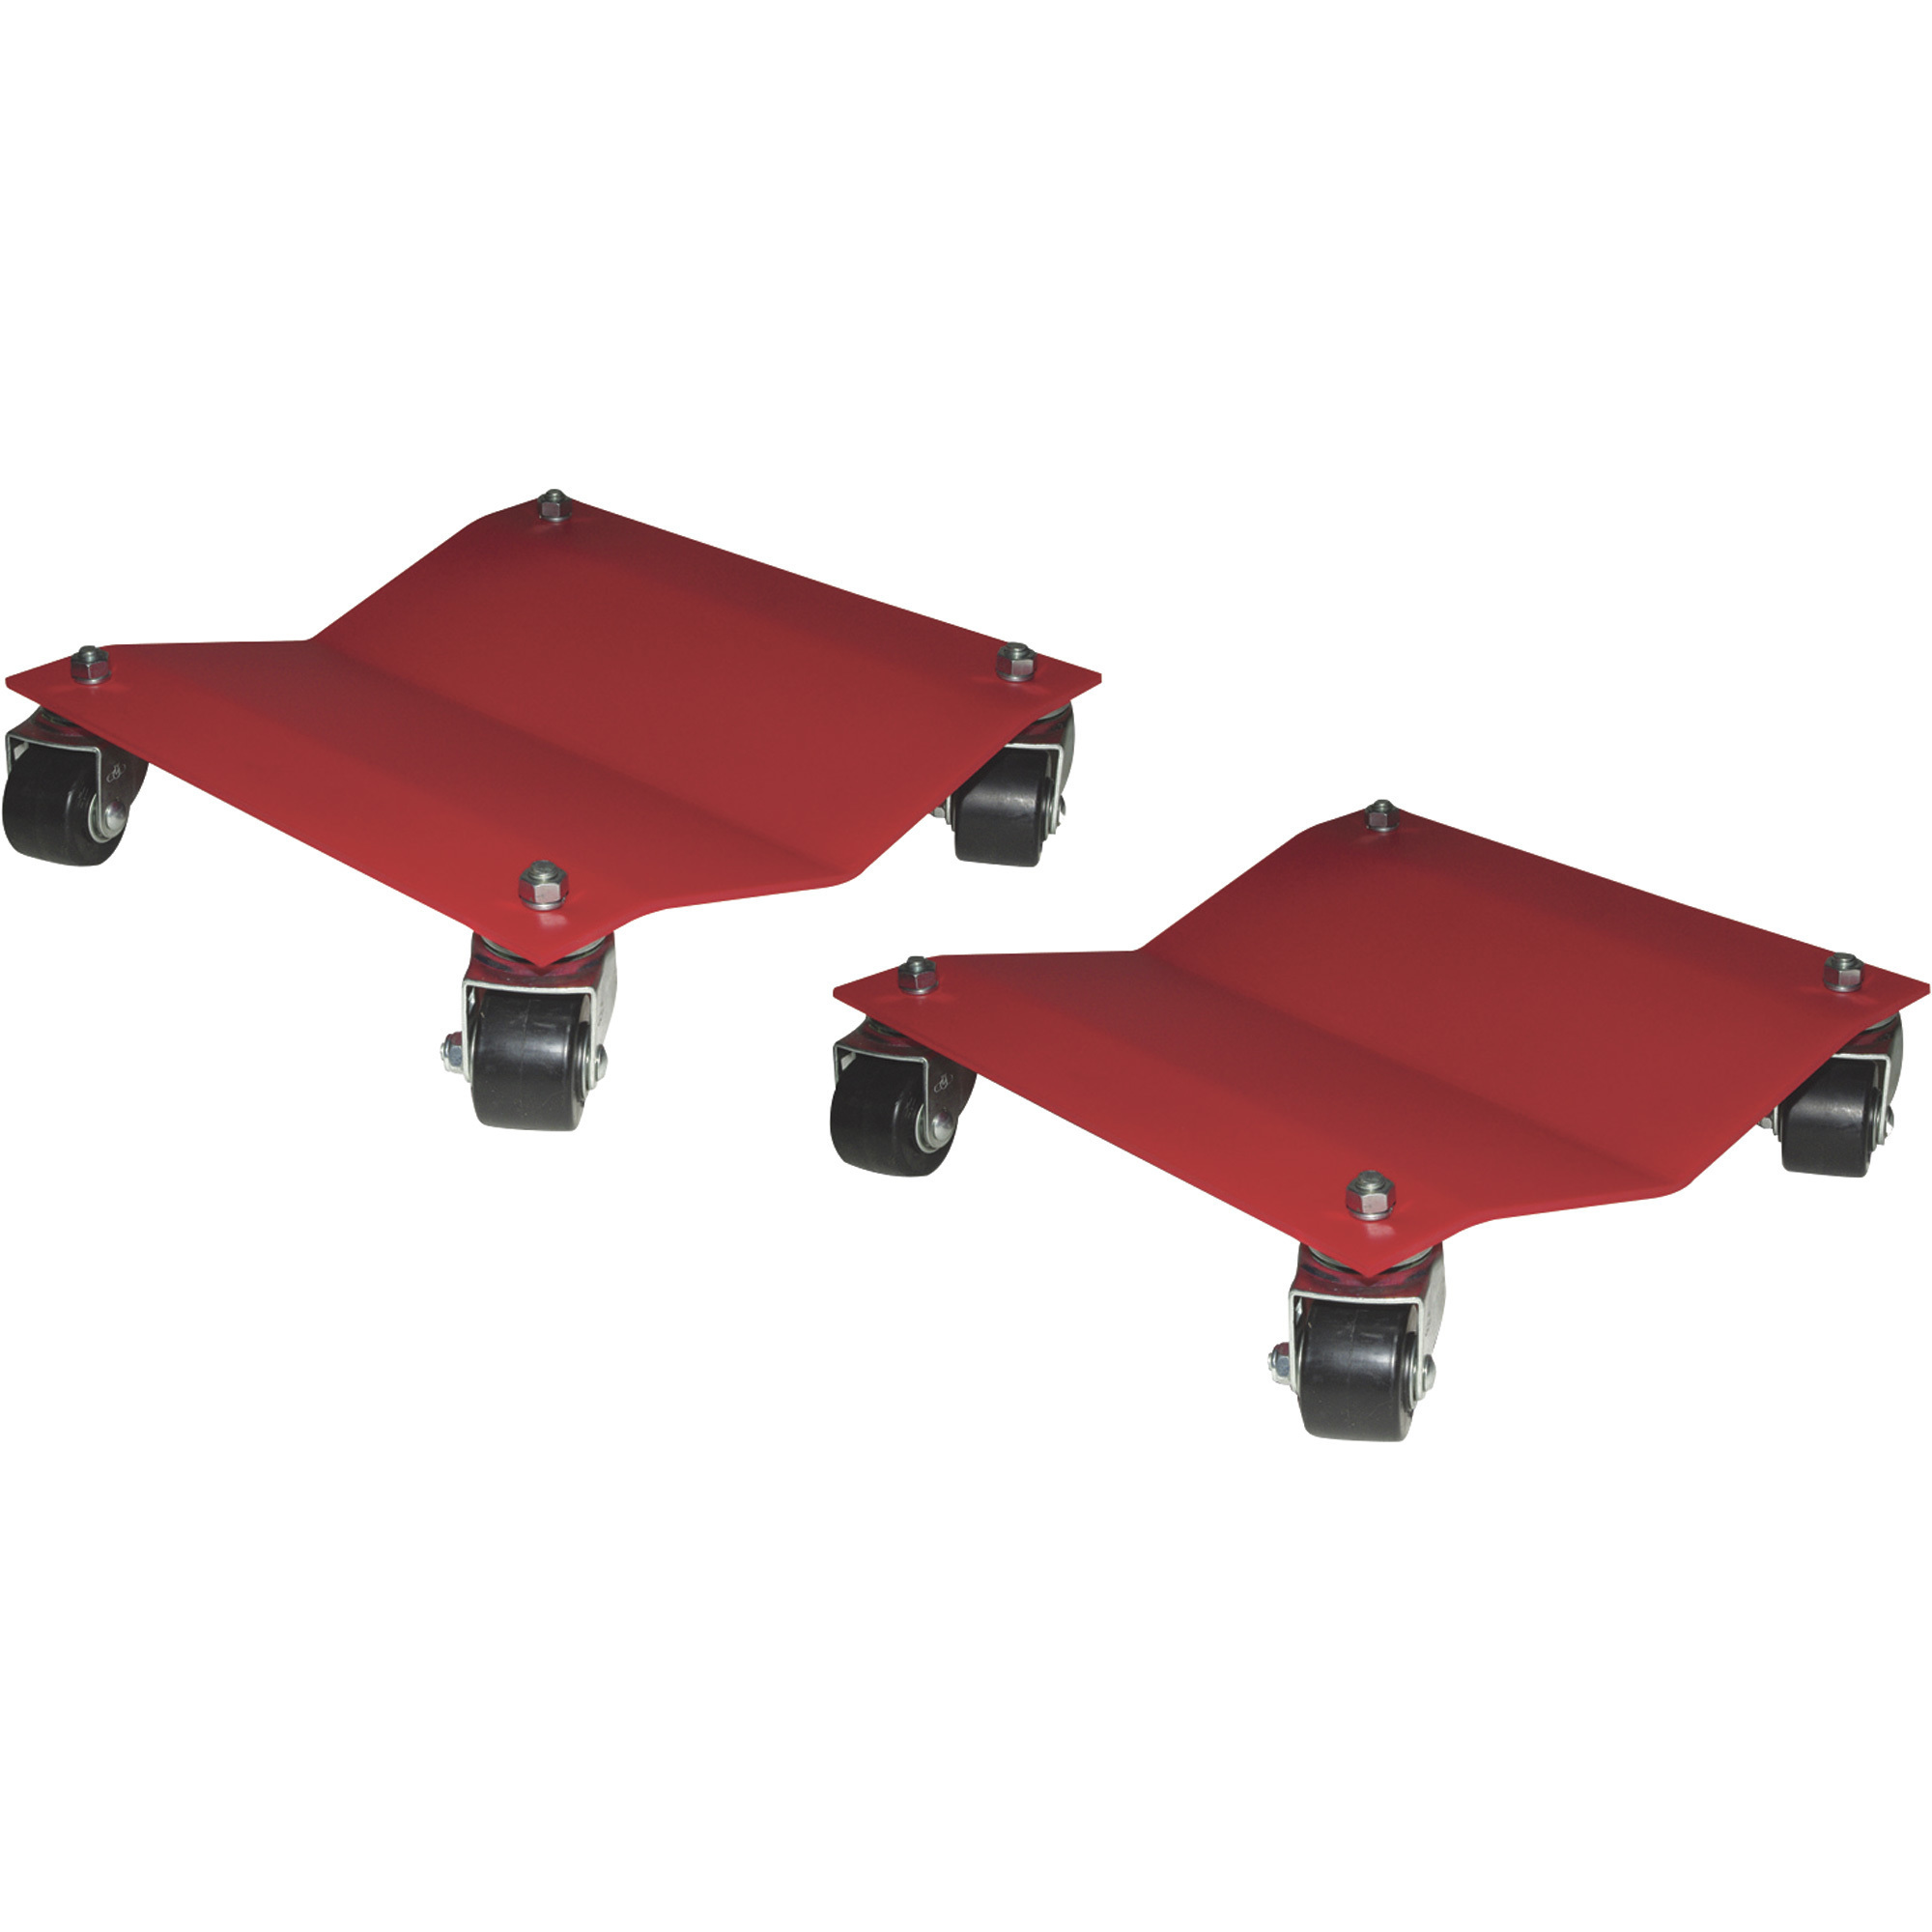 Auto Dolly Heavy-Duty Steel Automotive Dollies, 16Inch L x 16Inch W, 5,000-Lb. Total Capacity, 2-Pack